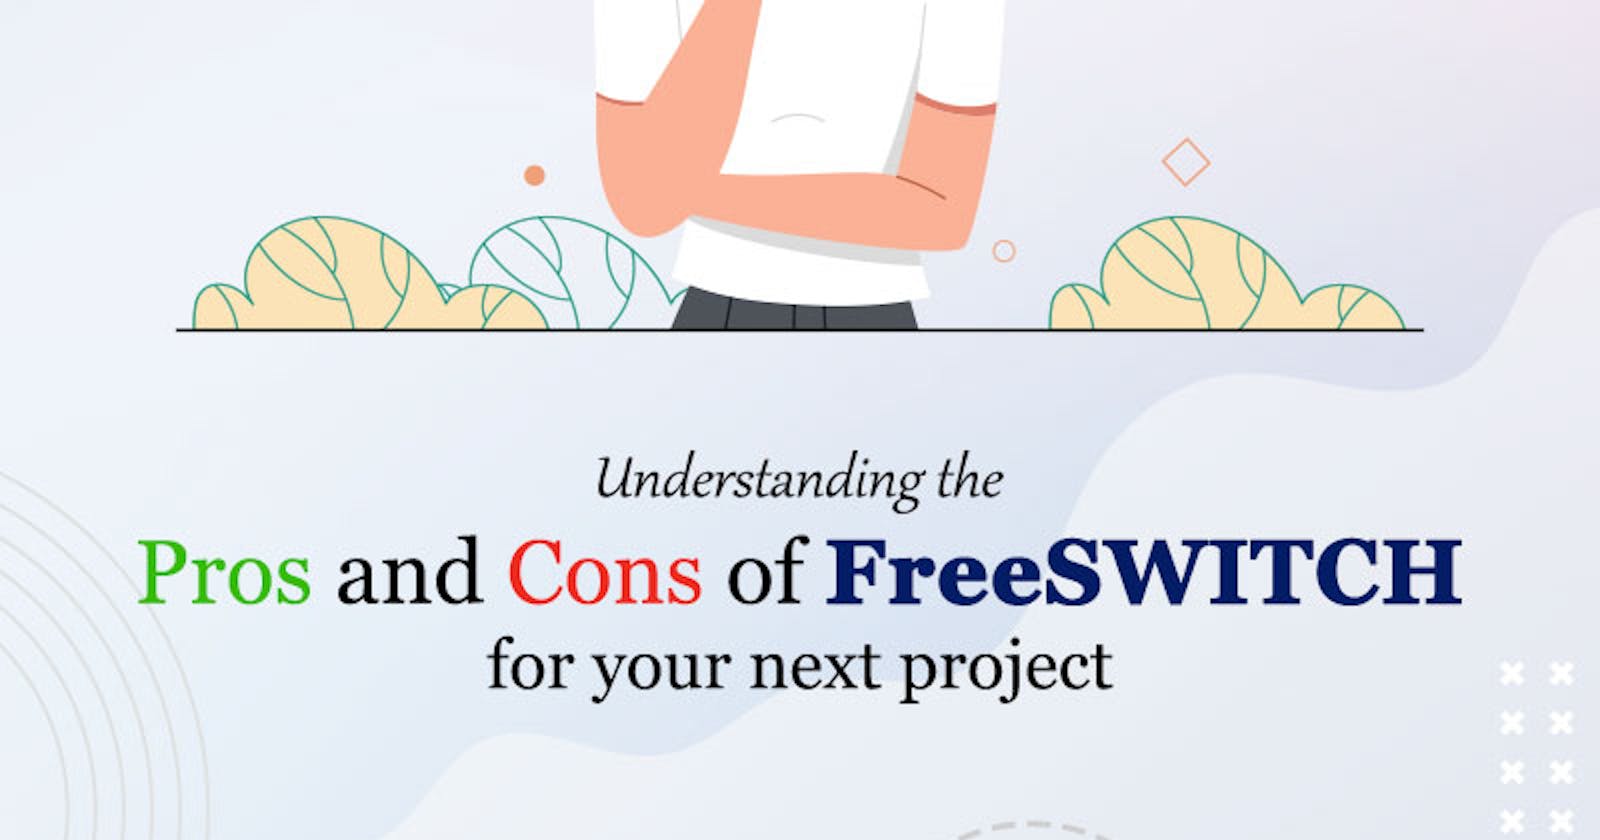 Understanding the Pros and Cons of FreeSWITCH for your next project